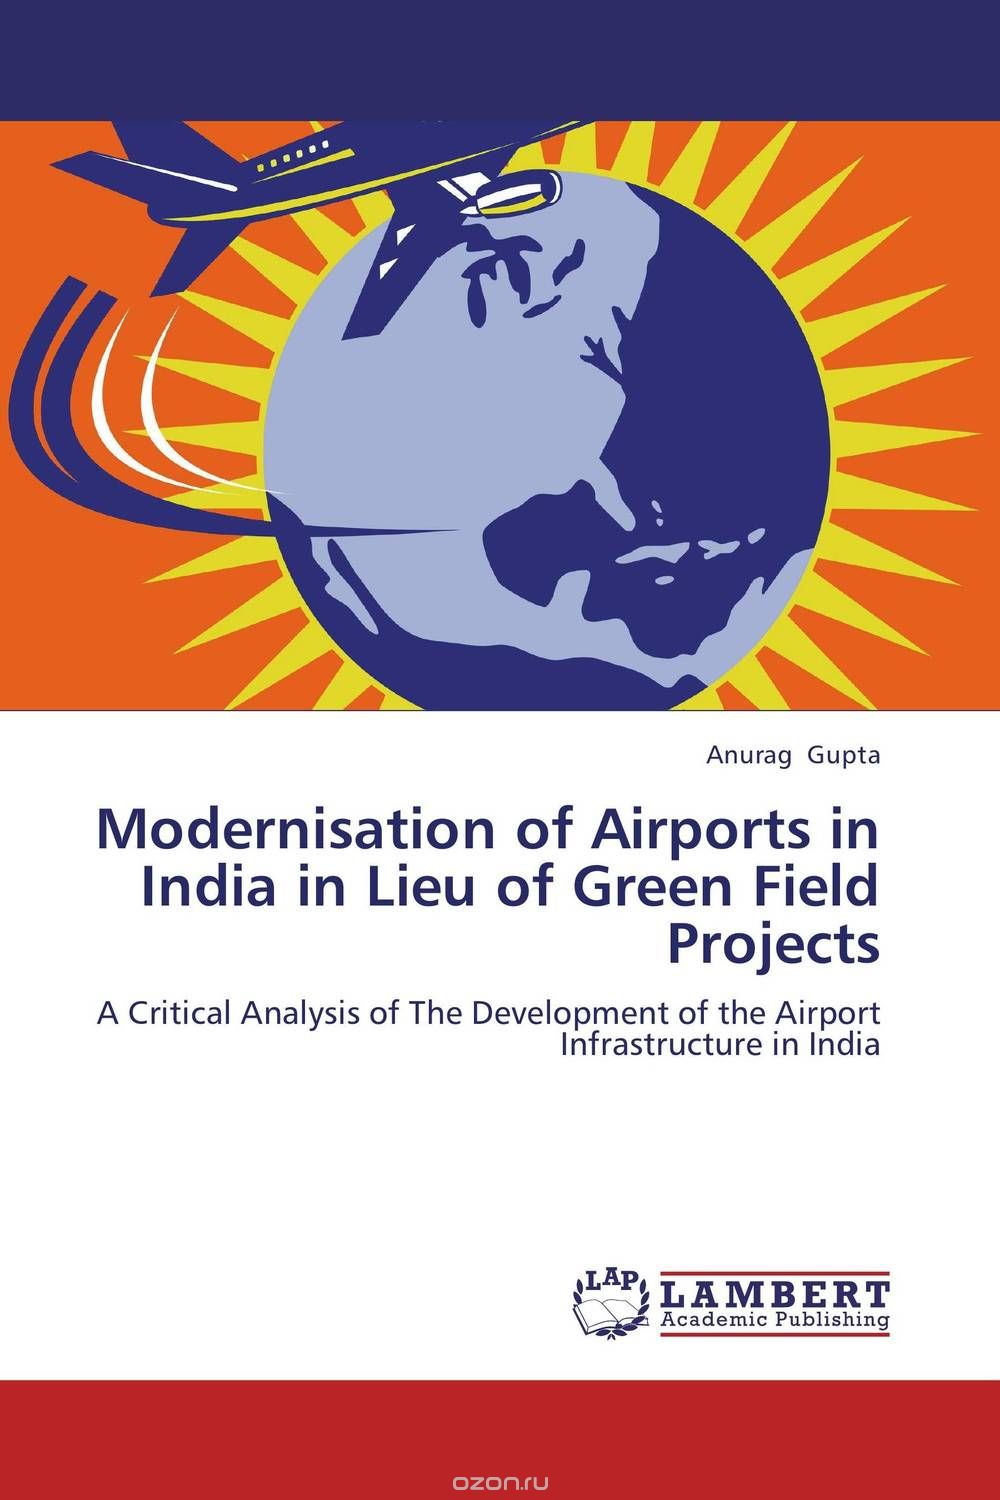 Скачать книгу "Modernisation of Airports in India in Lieu of Green Field Projects"